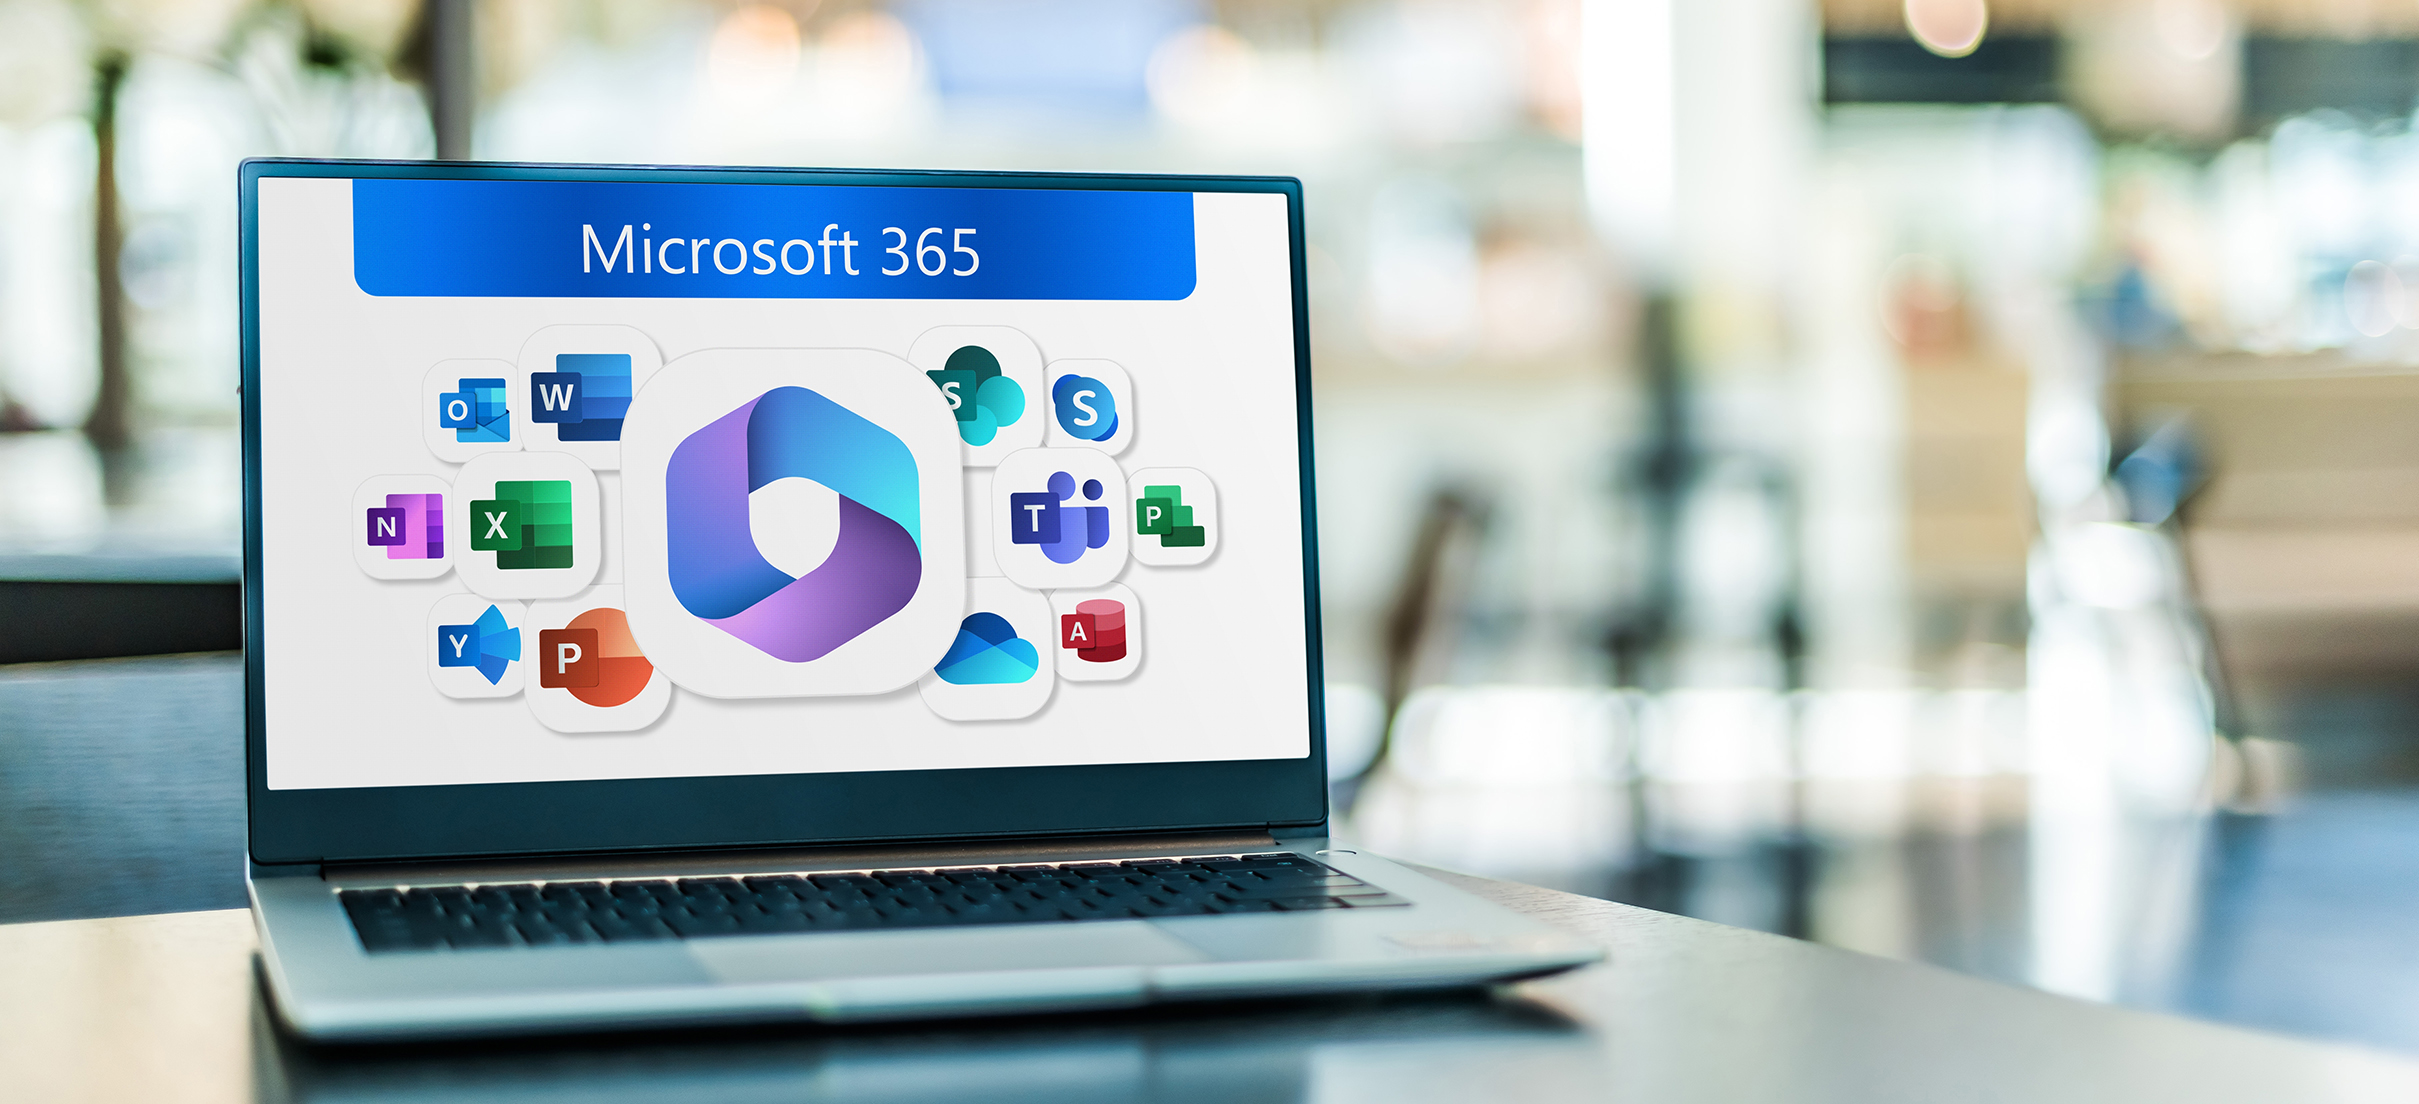 Windows 10 Pro: Experience the power and versatility of the latest Windows operating system, designed for modern businesses.
Microsoft Teams: Communicate and collaborate seamlessly with your team, whether you're in the office or working remotely.